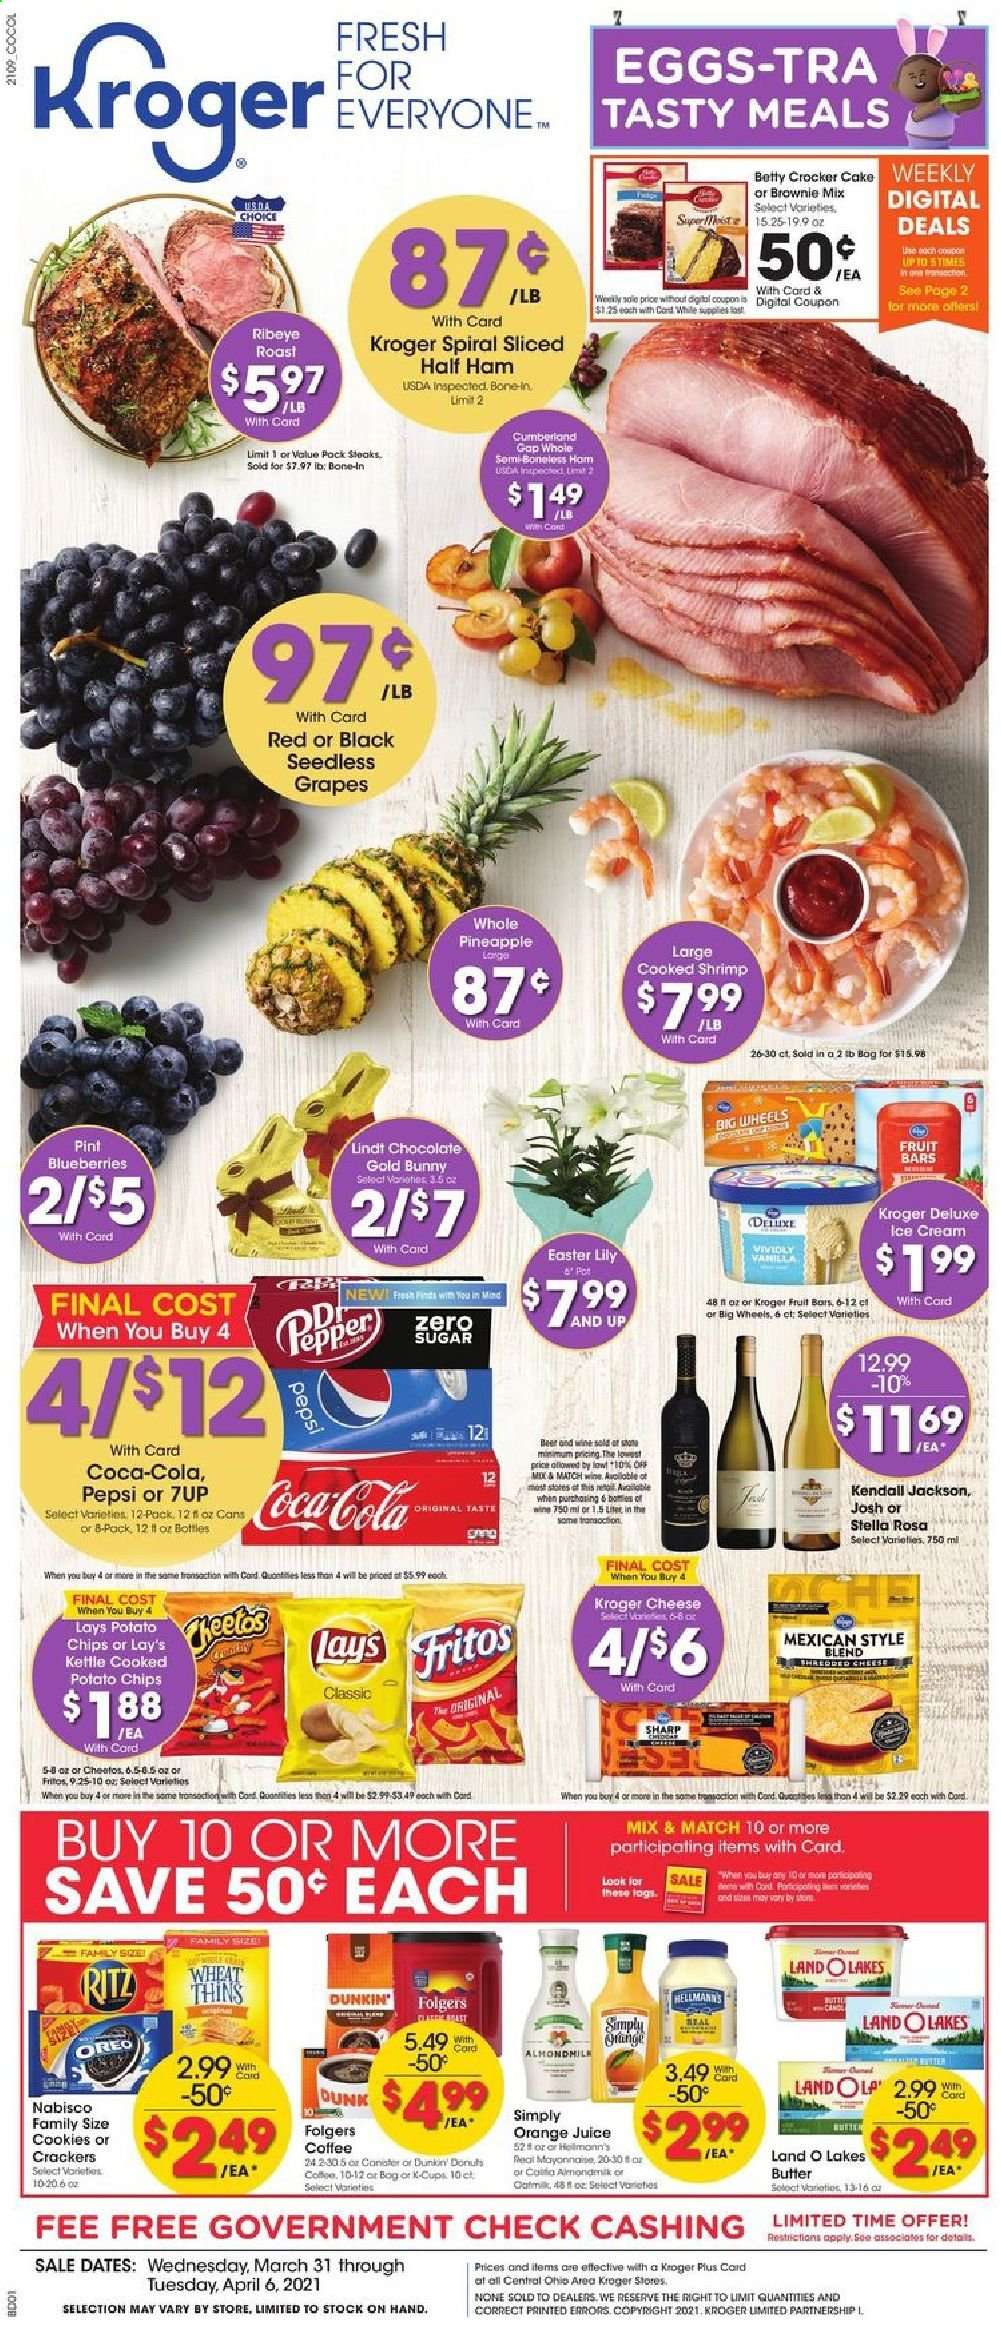 thumbnail - Kroger Flyer - 03/31/2021 - 04/06/2021 - Sales products - bed, blueberries, seedless grapes, brownie mix, cake, donut, shrimps, ham, cheese, Oreo, eggs, butter, mayonnaise, ice cream, cookies, chocolate, Lindt, crackers, RITZ, potato chips, Cheetos, chips, Lay’s, Thins, Fritos, Coca-Cola, Pepsi, orange juice, juice, 7UP, coffee, Folgers, coffee capsules, L'Or, K-Cups, wine, beer, pot, Sharp, half ham, grapes, pineapple. Page 1.